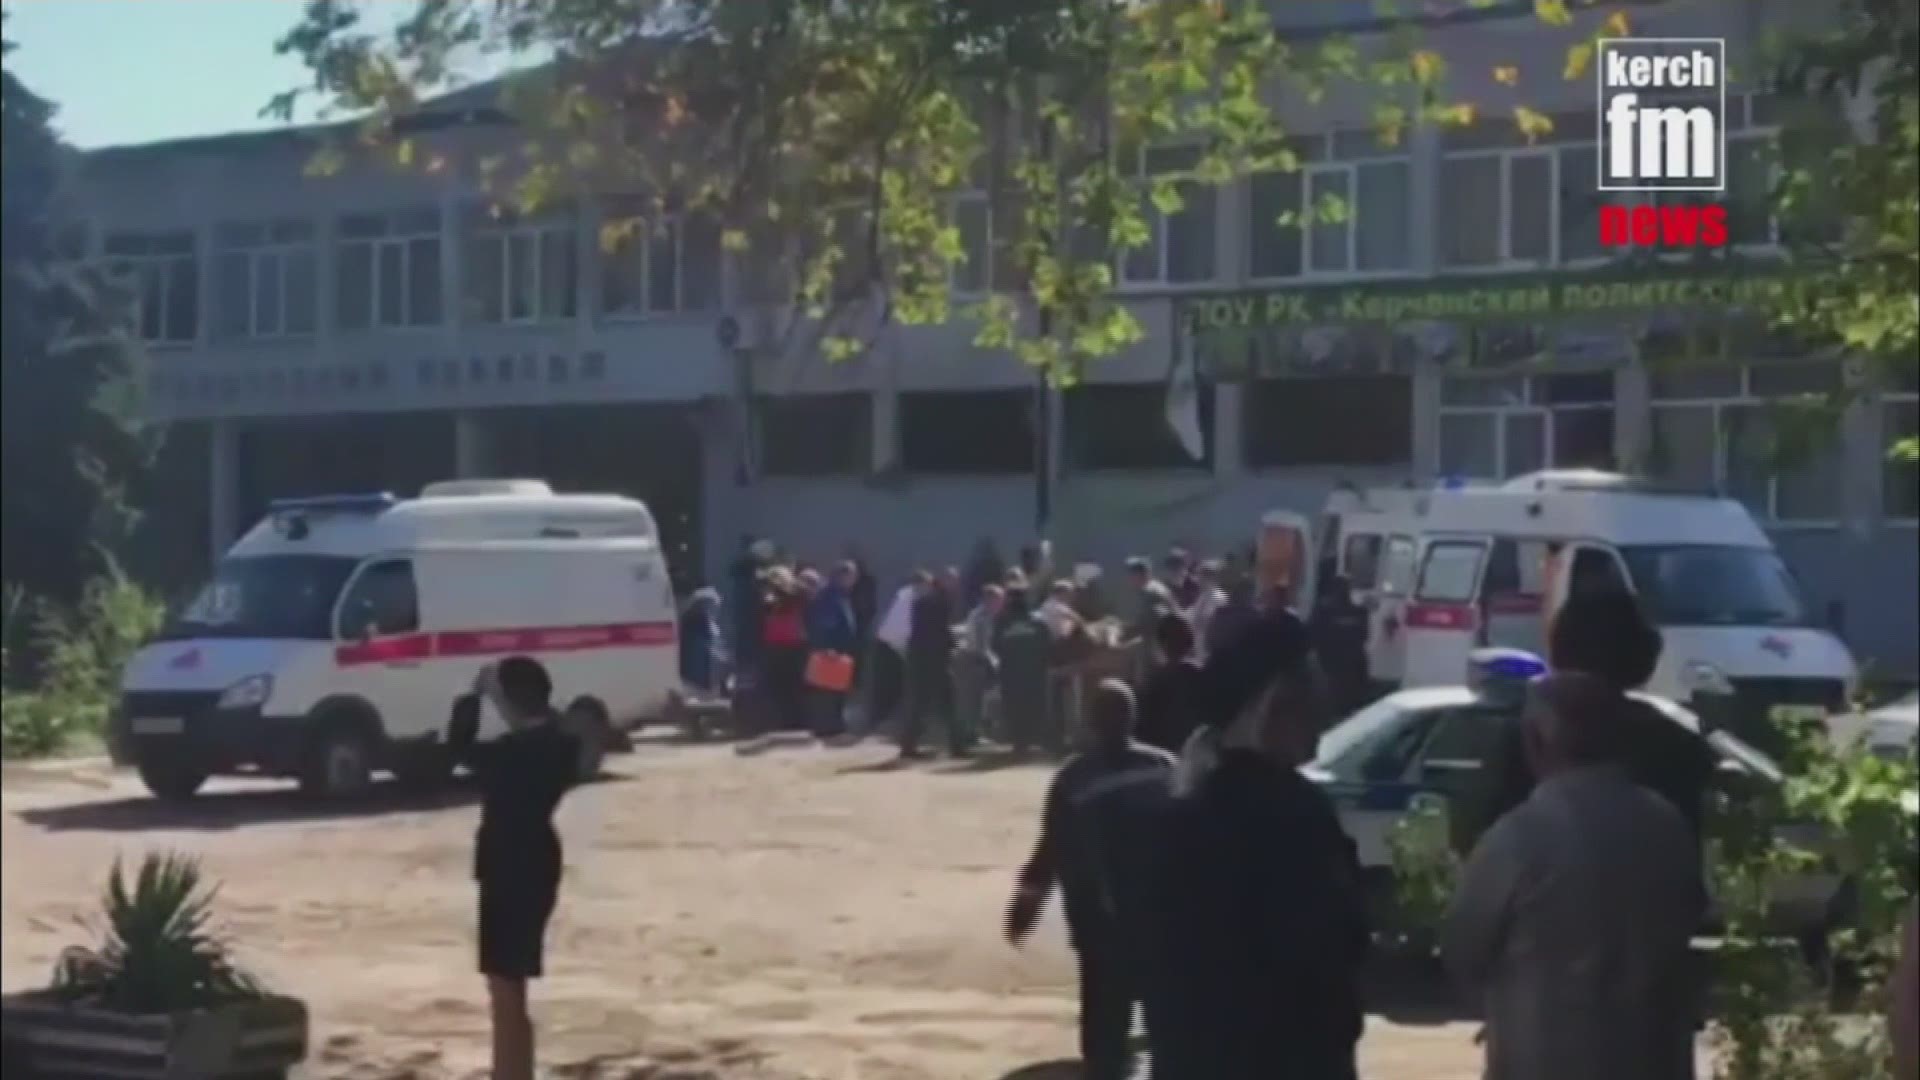 An explosive device injured dozens at a vocational school in Crimea, Russian officials said Wednesday.